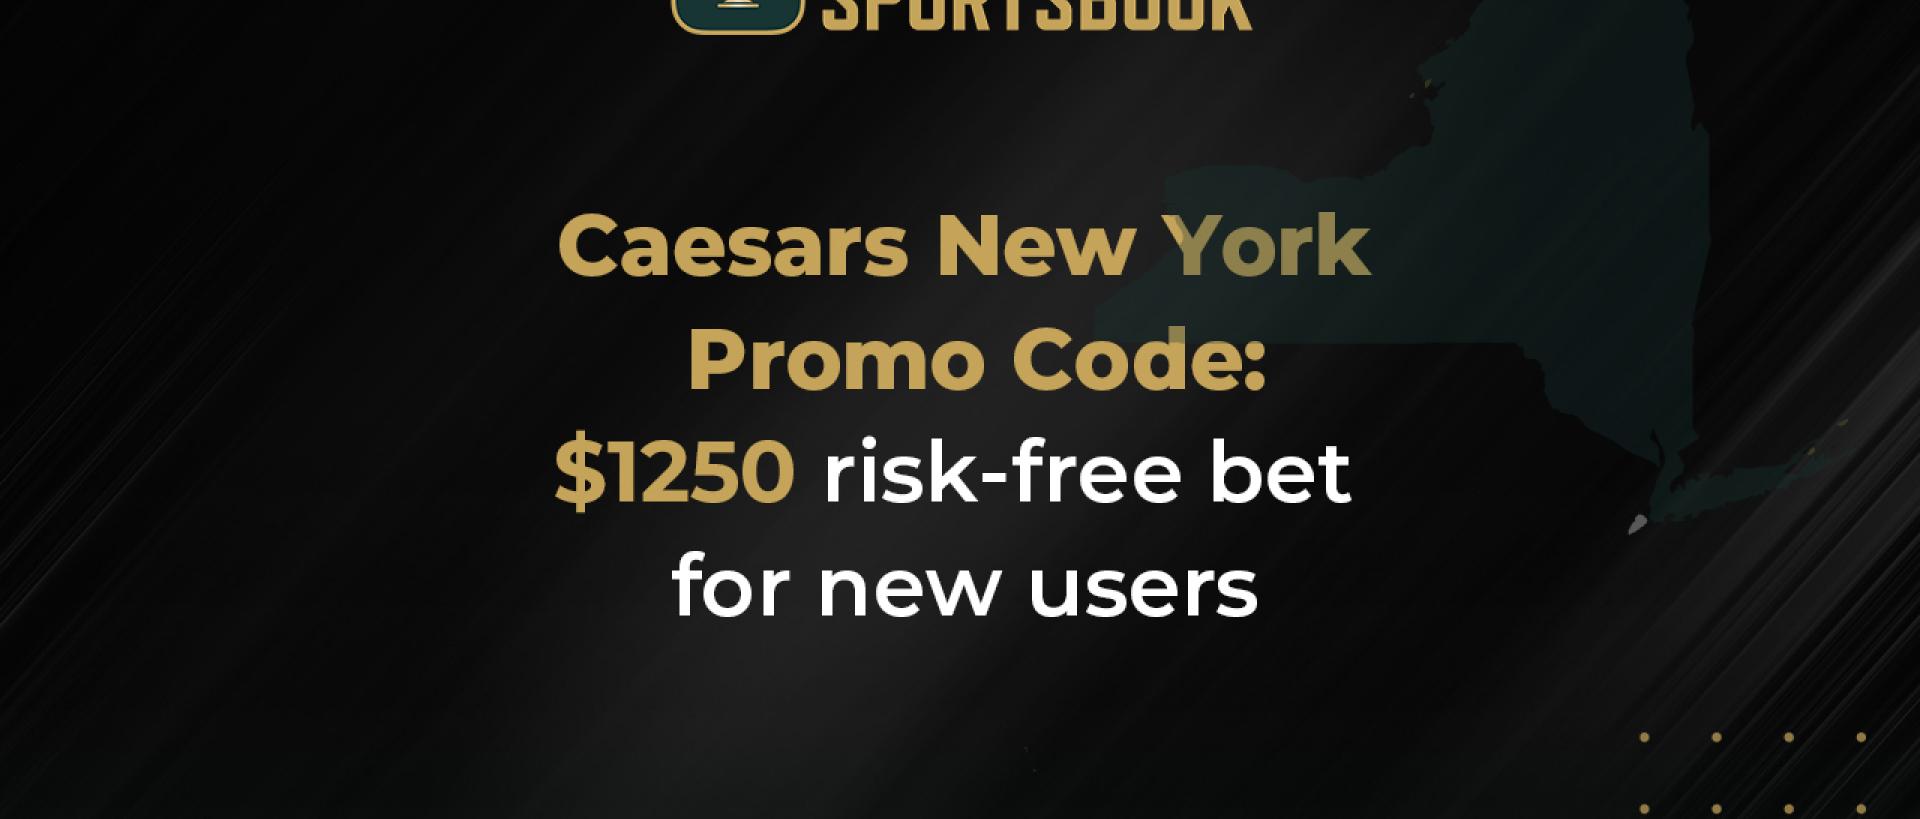 Caesars New York Promo Code: Get your $1,250 Risk-Free bet at Caesars Sportsbook New York today!